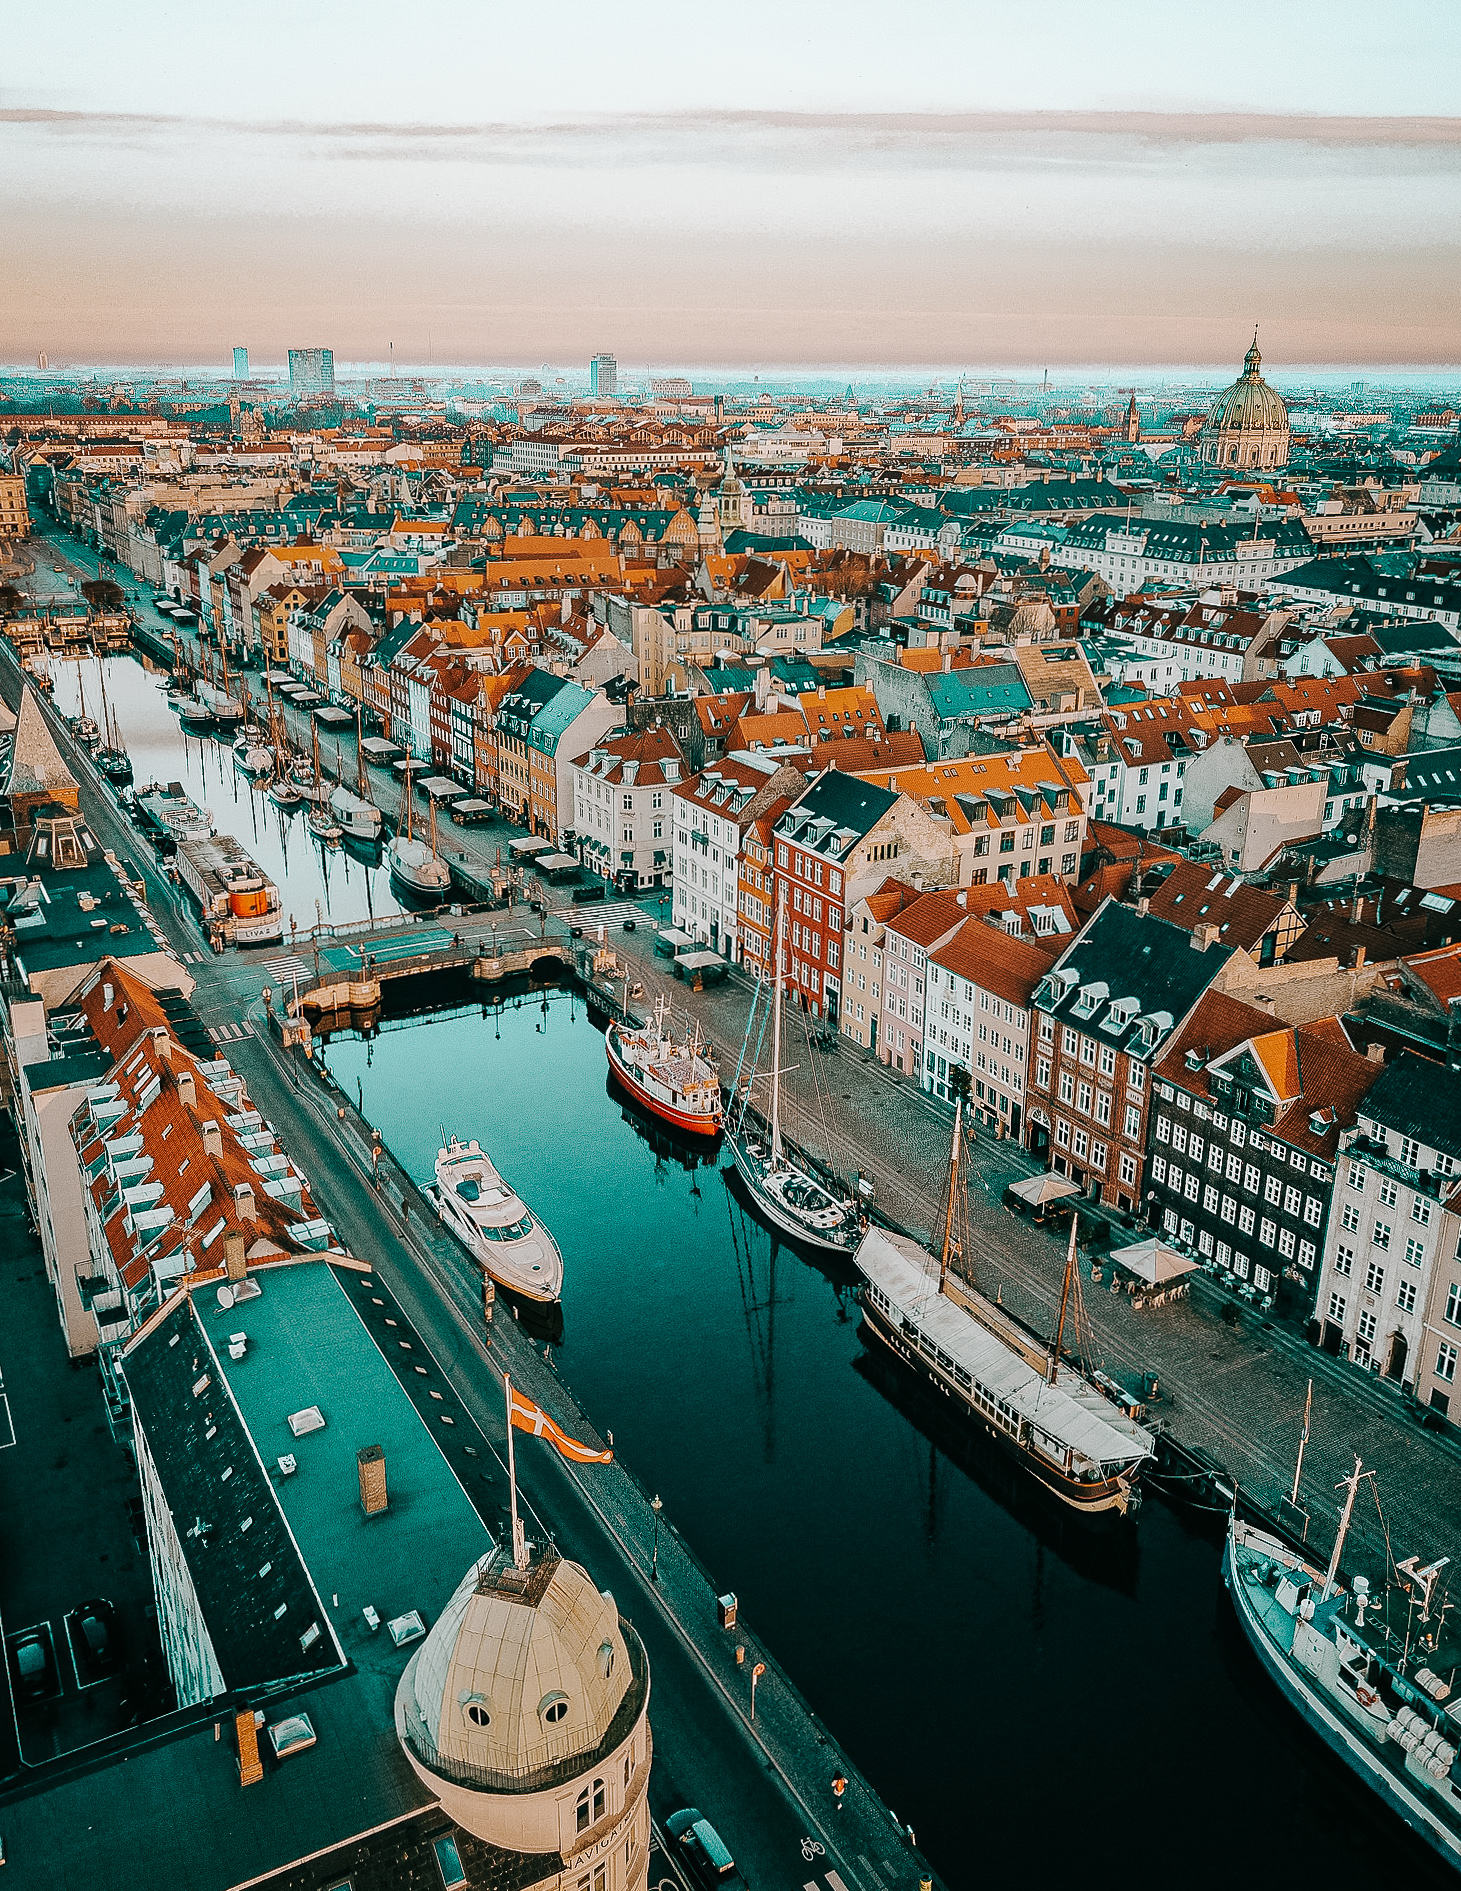 A view of Copenhagen from above, with a view of the Marble church in the distance and the fisherman houses of Nyhavn and the canal below.